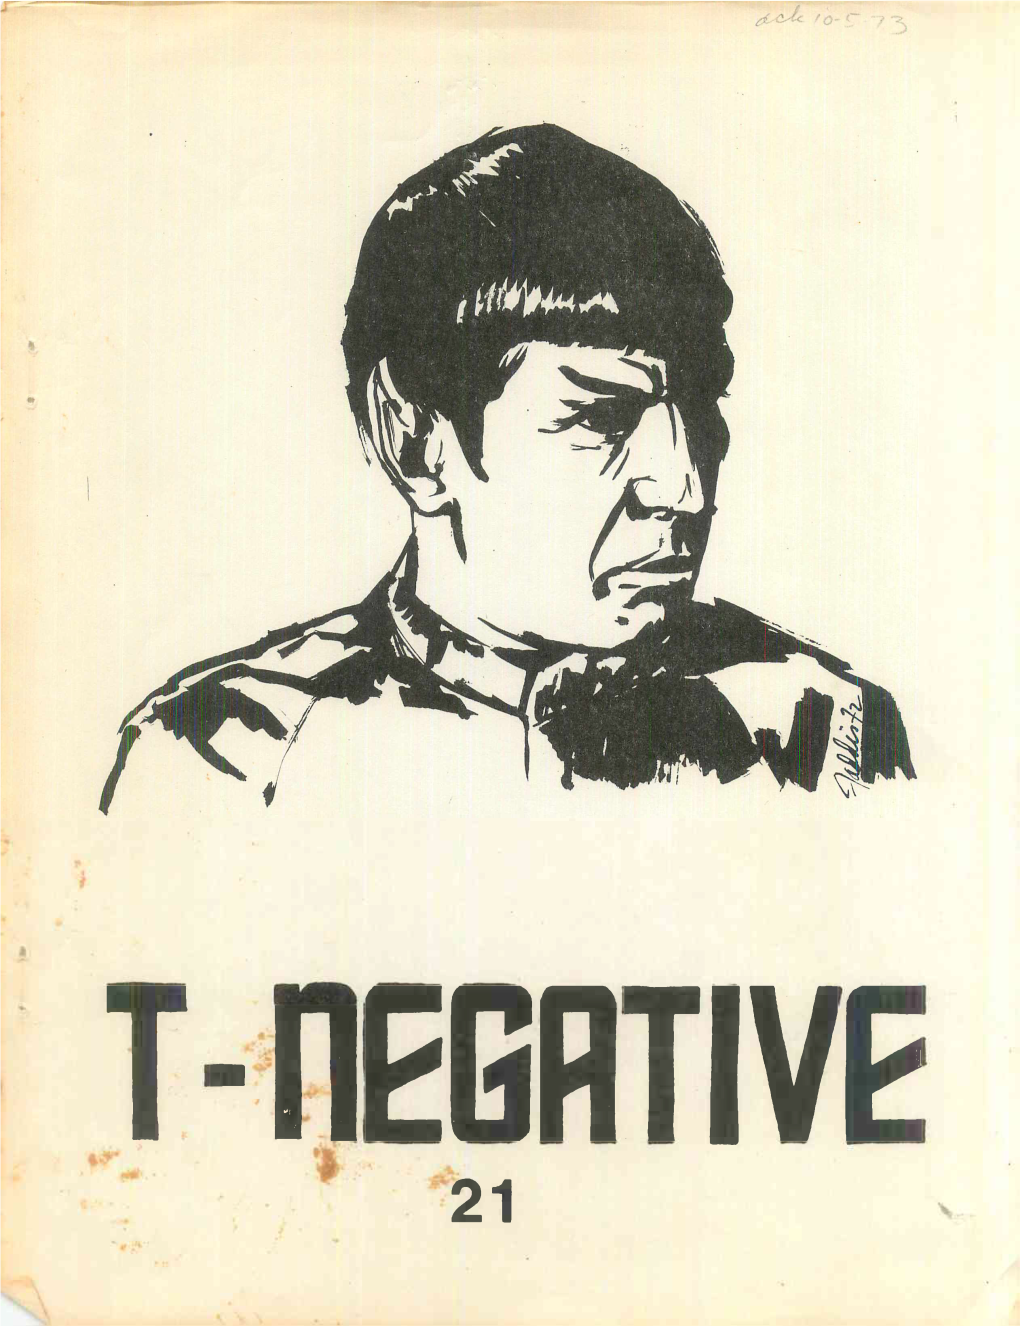 T-Negative 21, August 1973, Comes of Age (Old-Style) from Ruth Berman, 5O20 Edgewater Boulevard, Minneapolis Minnesota 55^17• Published Irregularly